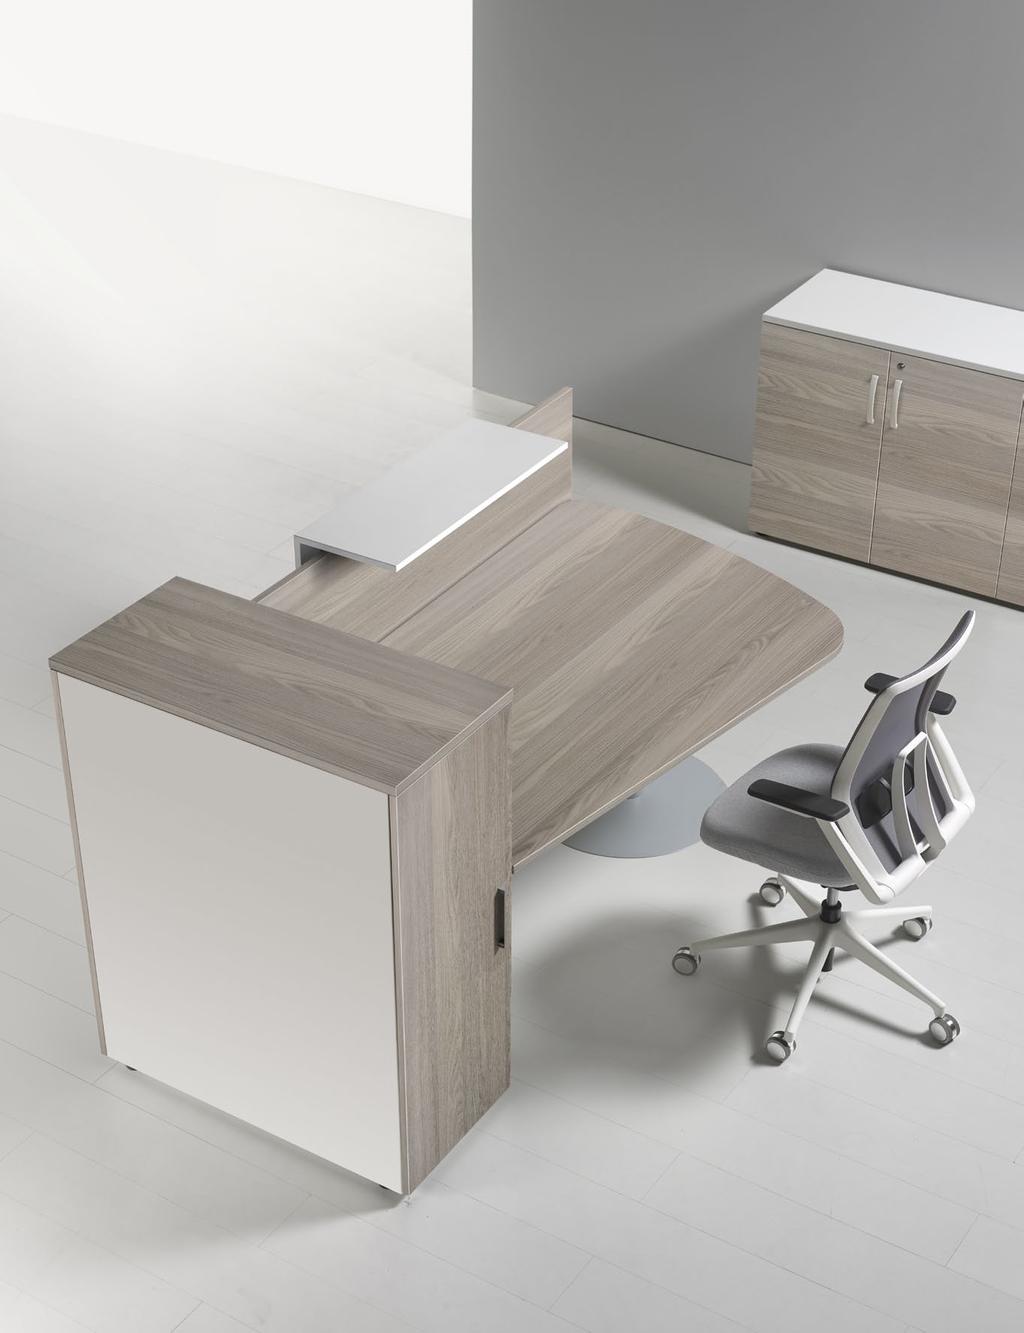 Indipendent leg in silver or white finishing. Worktops and melamine fronts. Optional shaped desk top in metal or melamine.